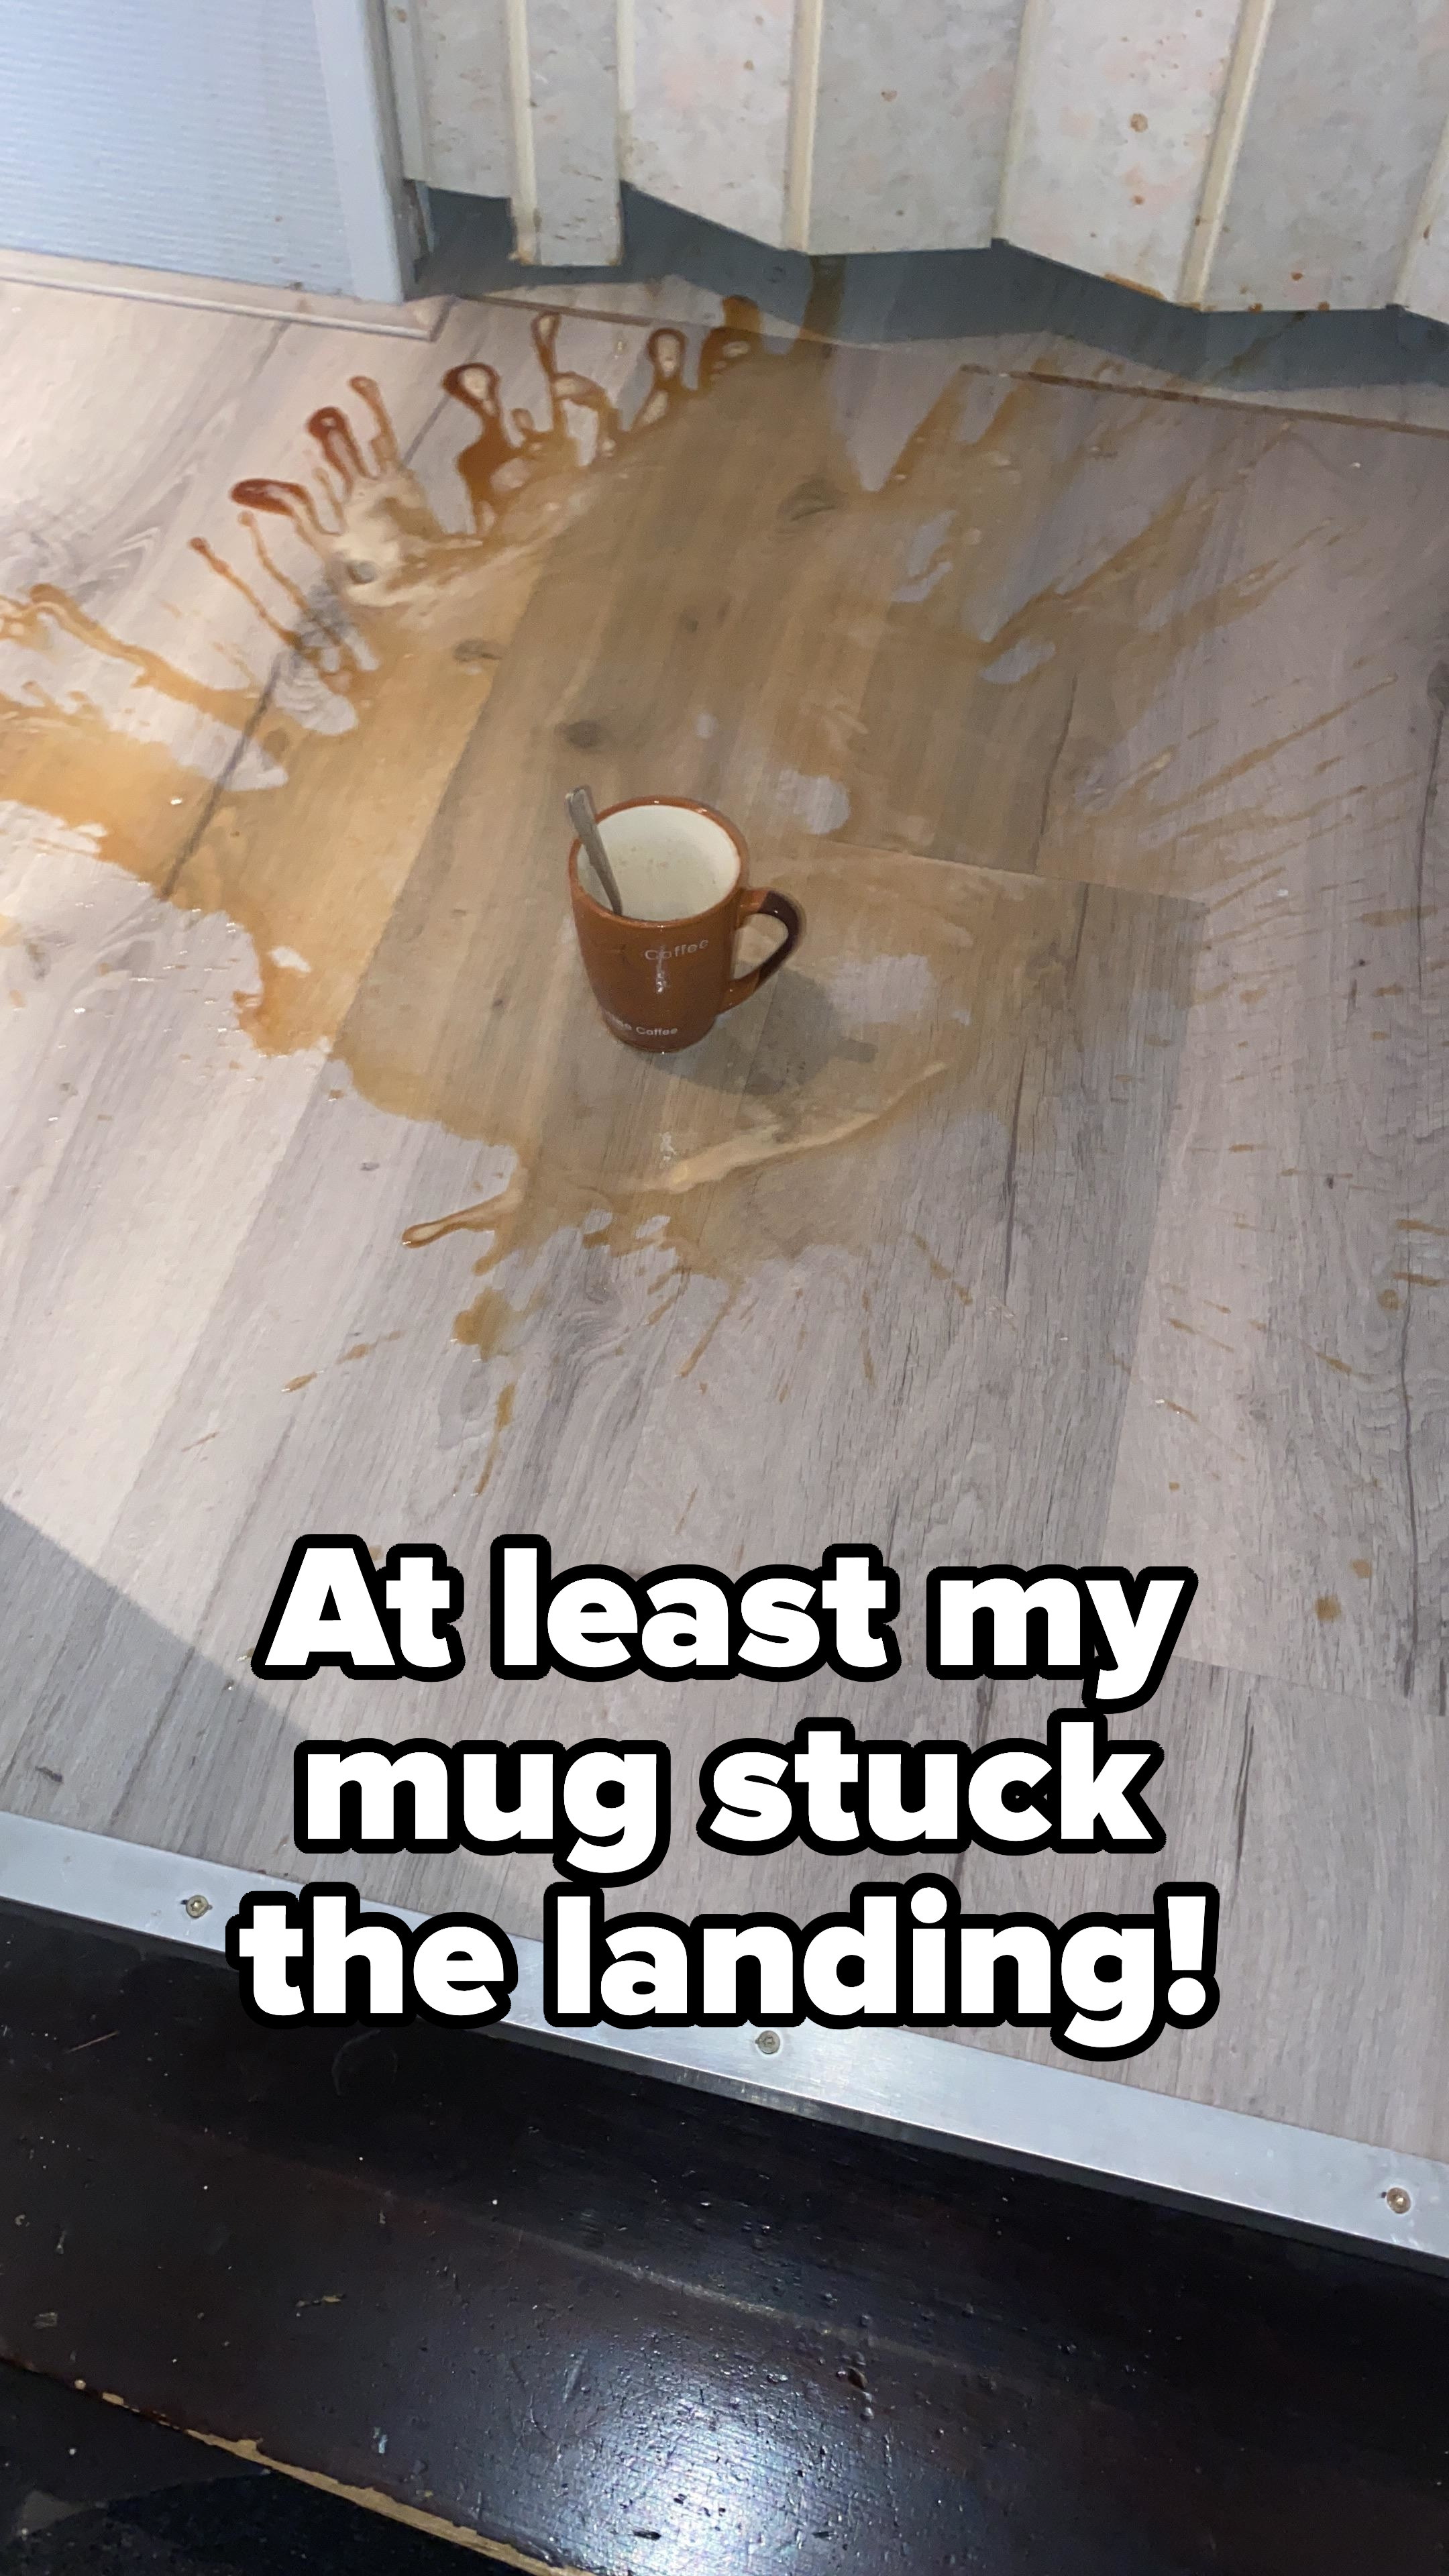 Mug that fell, dropping its contents, but landed upright, with caption: &quot;At least my mug stuck the landing!&quot;